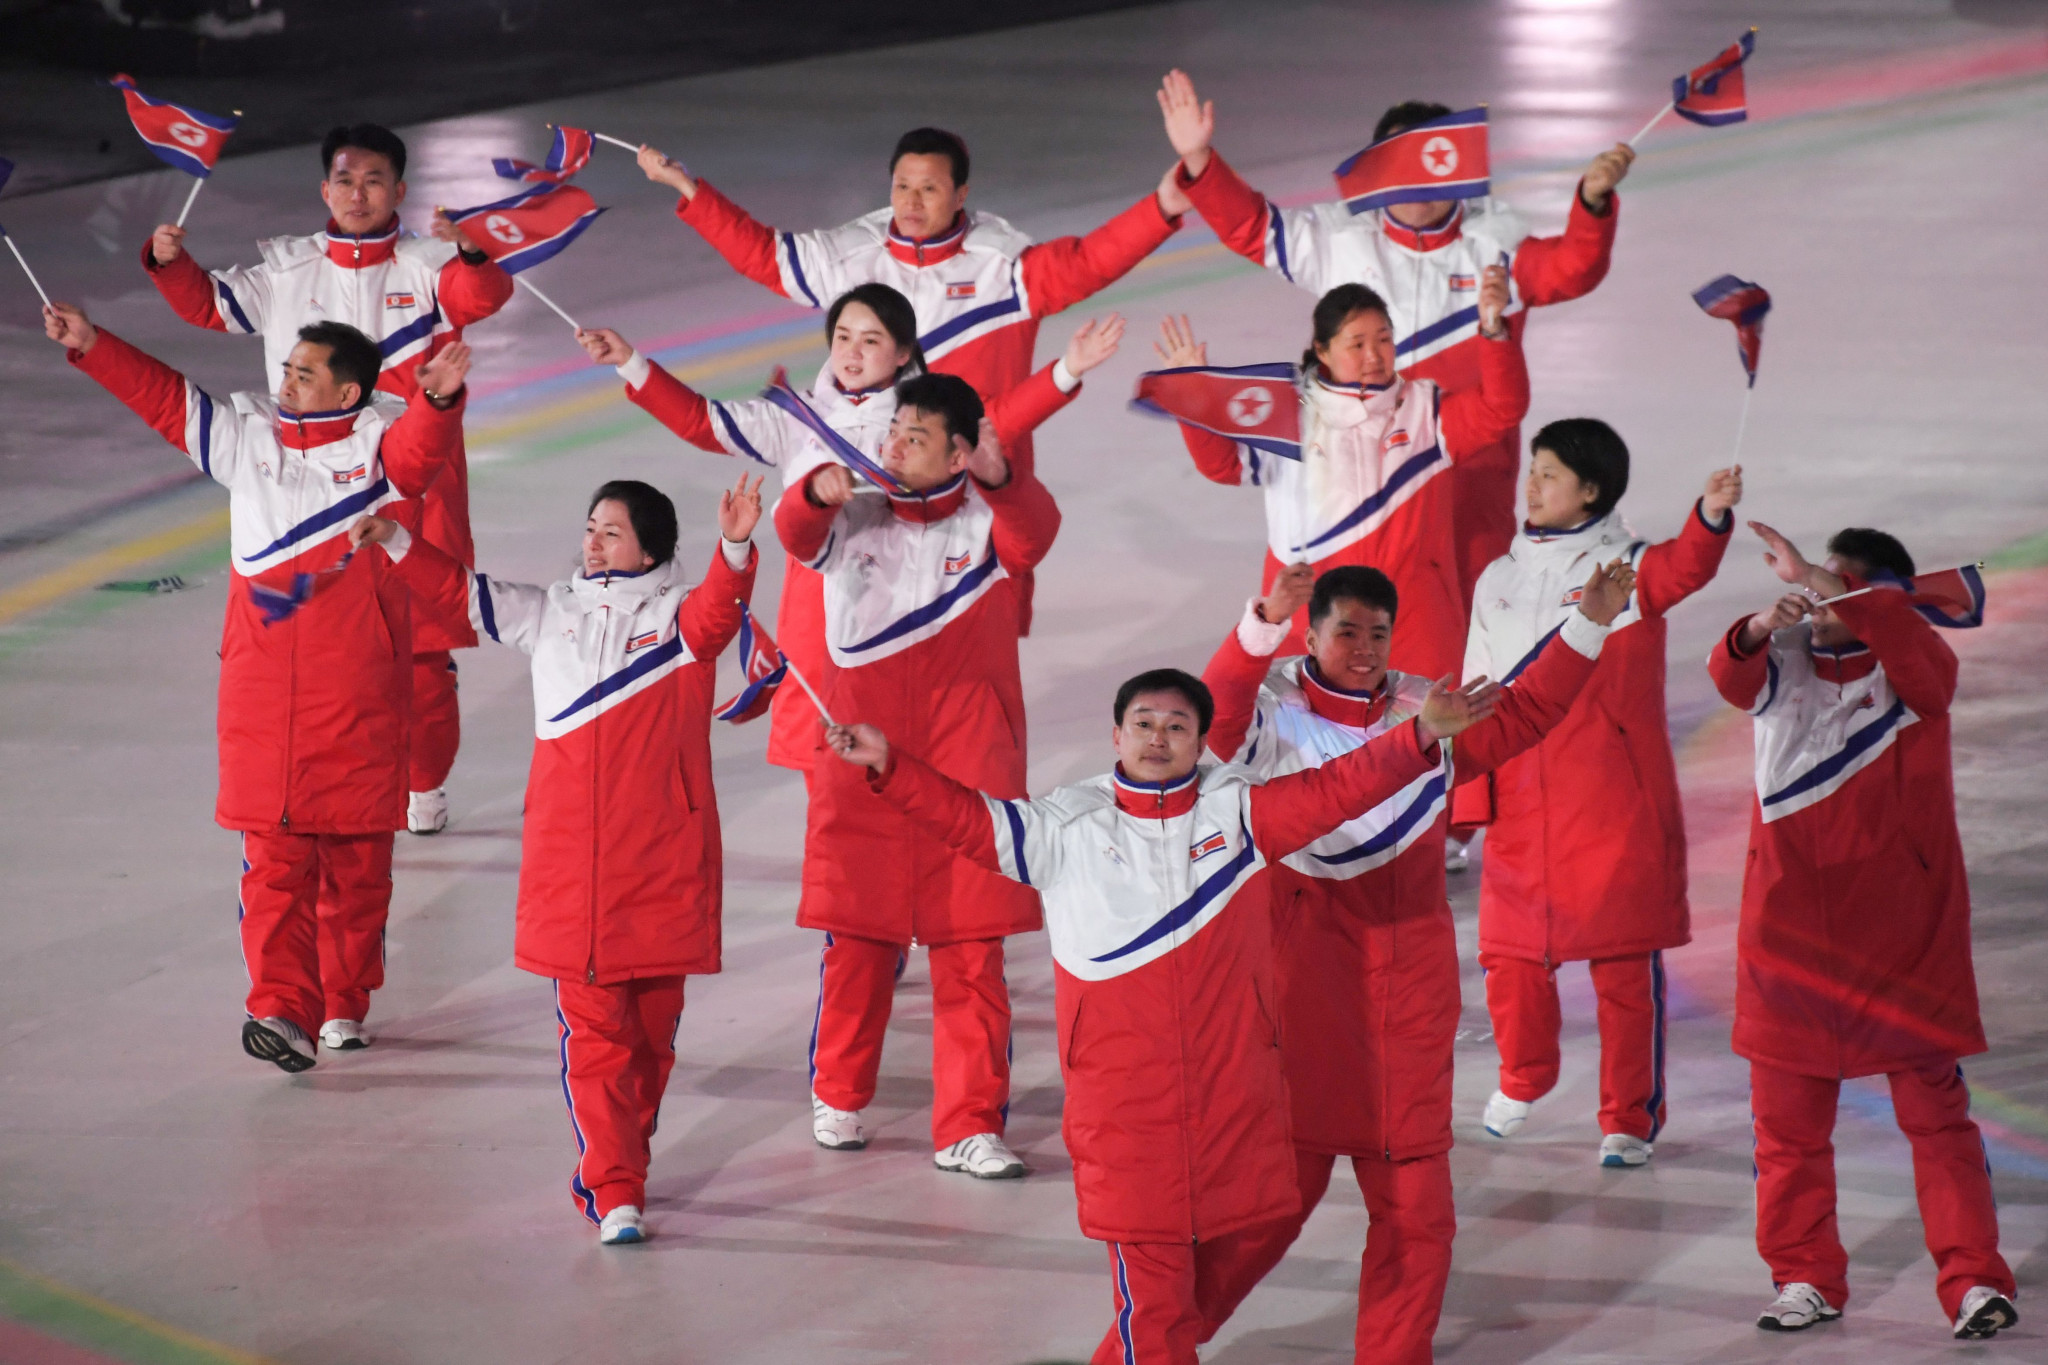 After talks between the two Koreas on the subject of marching under a united flag broke down last night, the North Korean delegation entered the arena under their own flag ©Getty Images